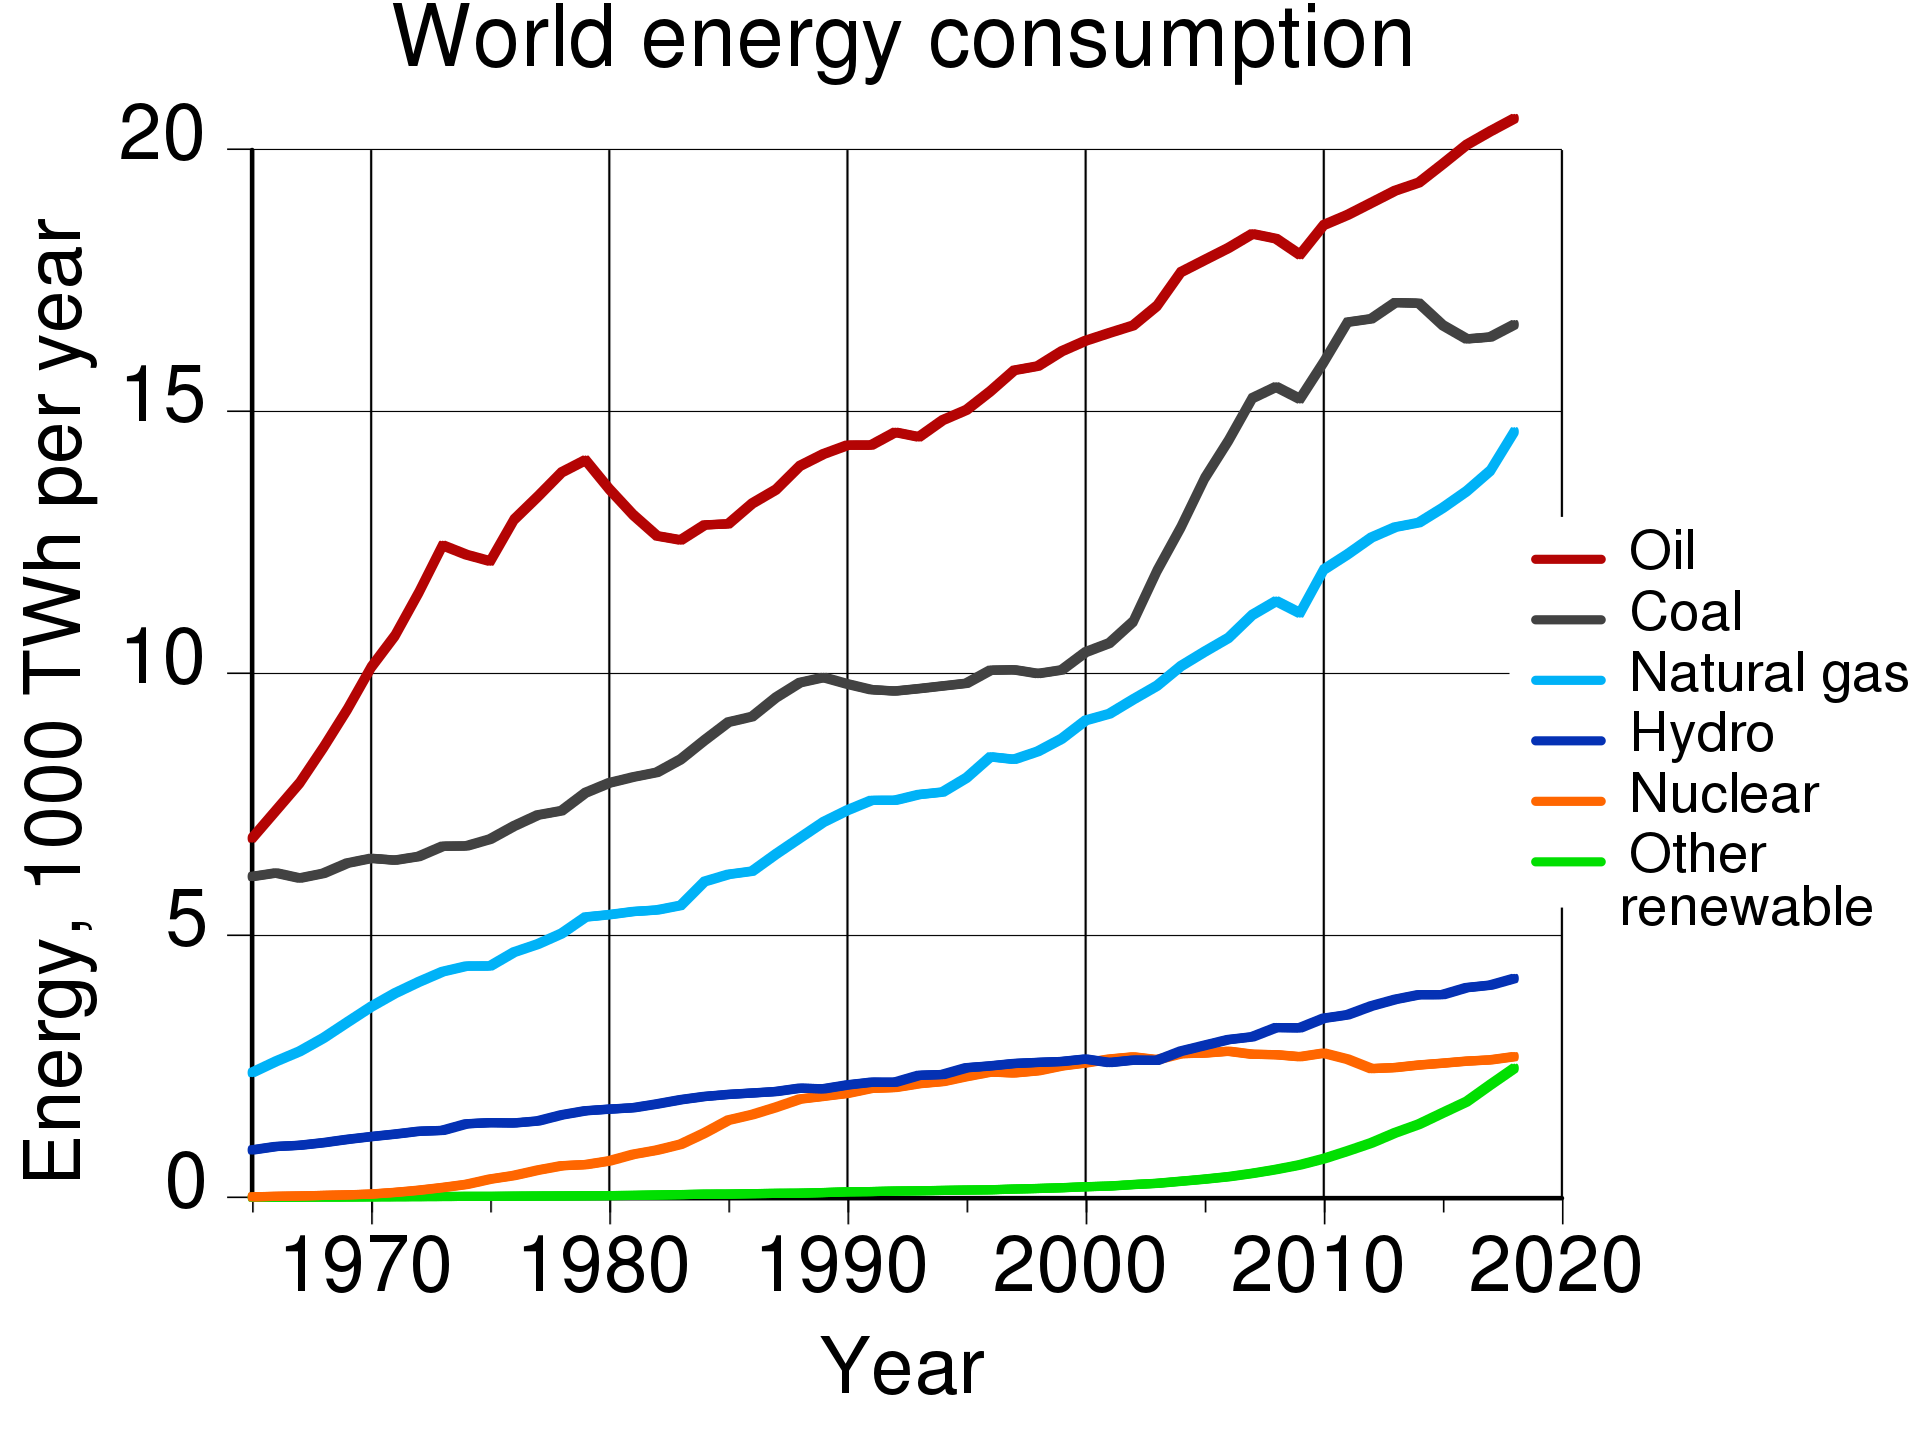 1920px-World_energy_consumption.svg.png